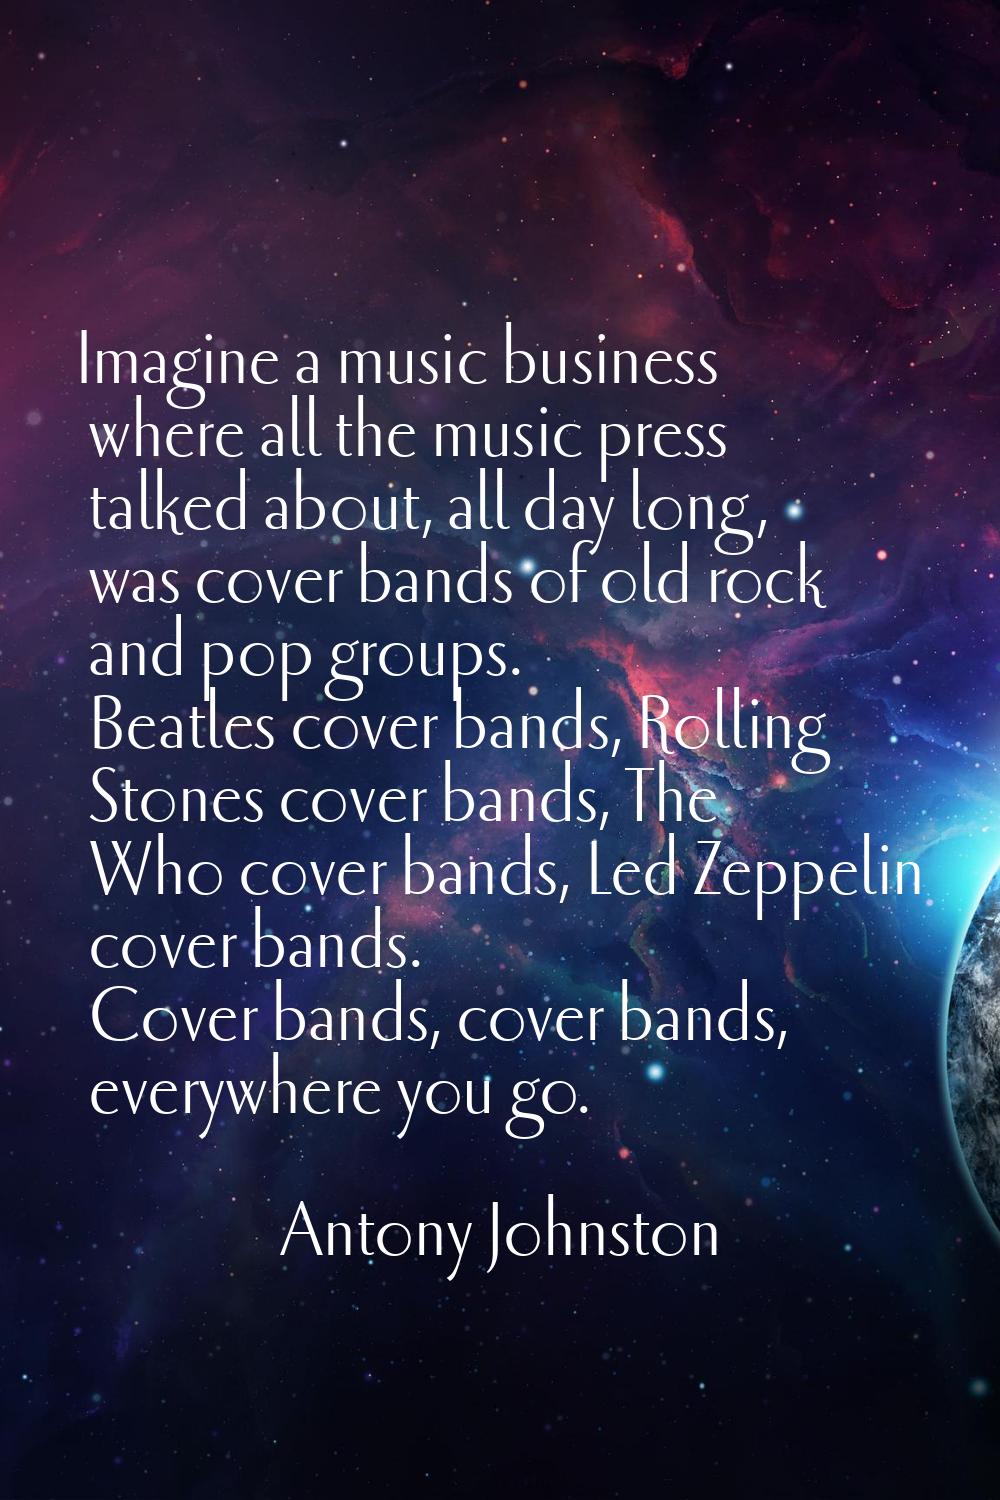 Imagine a music business where all the music press talked about, all day long, was cover bands of o